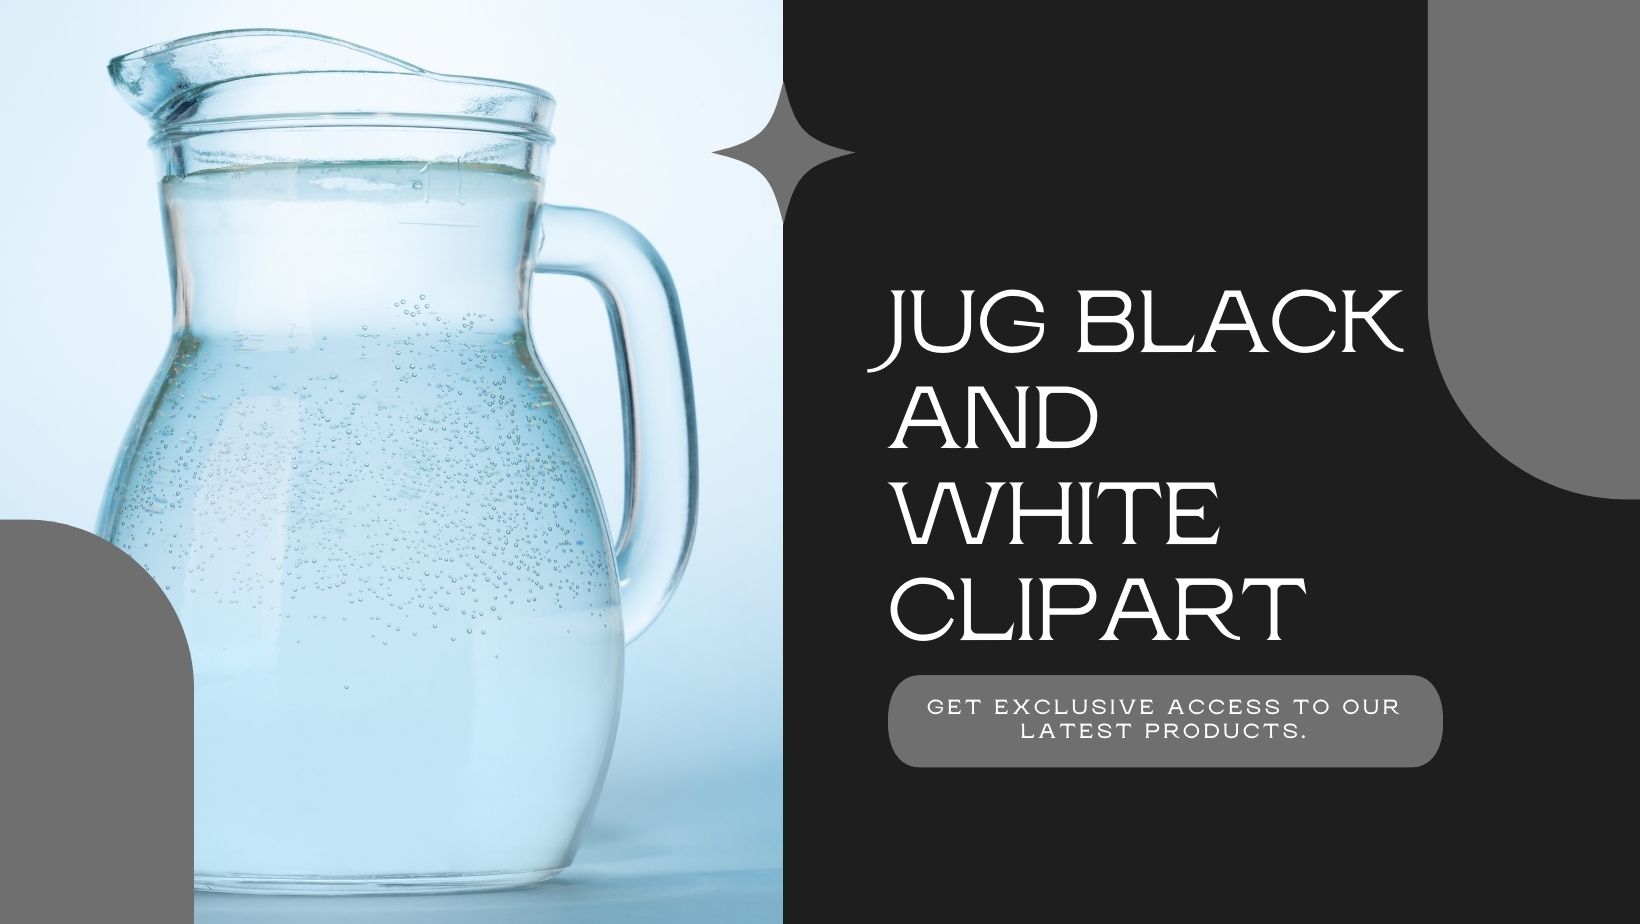 jug black and white clipart